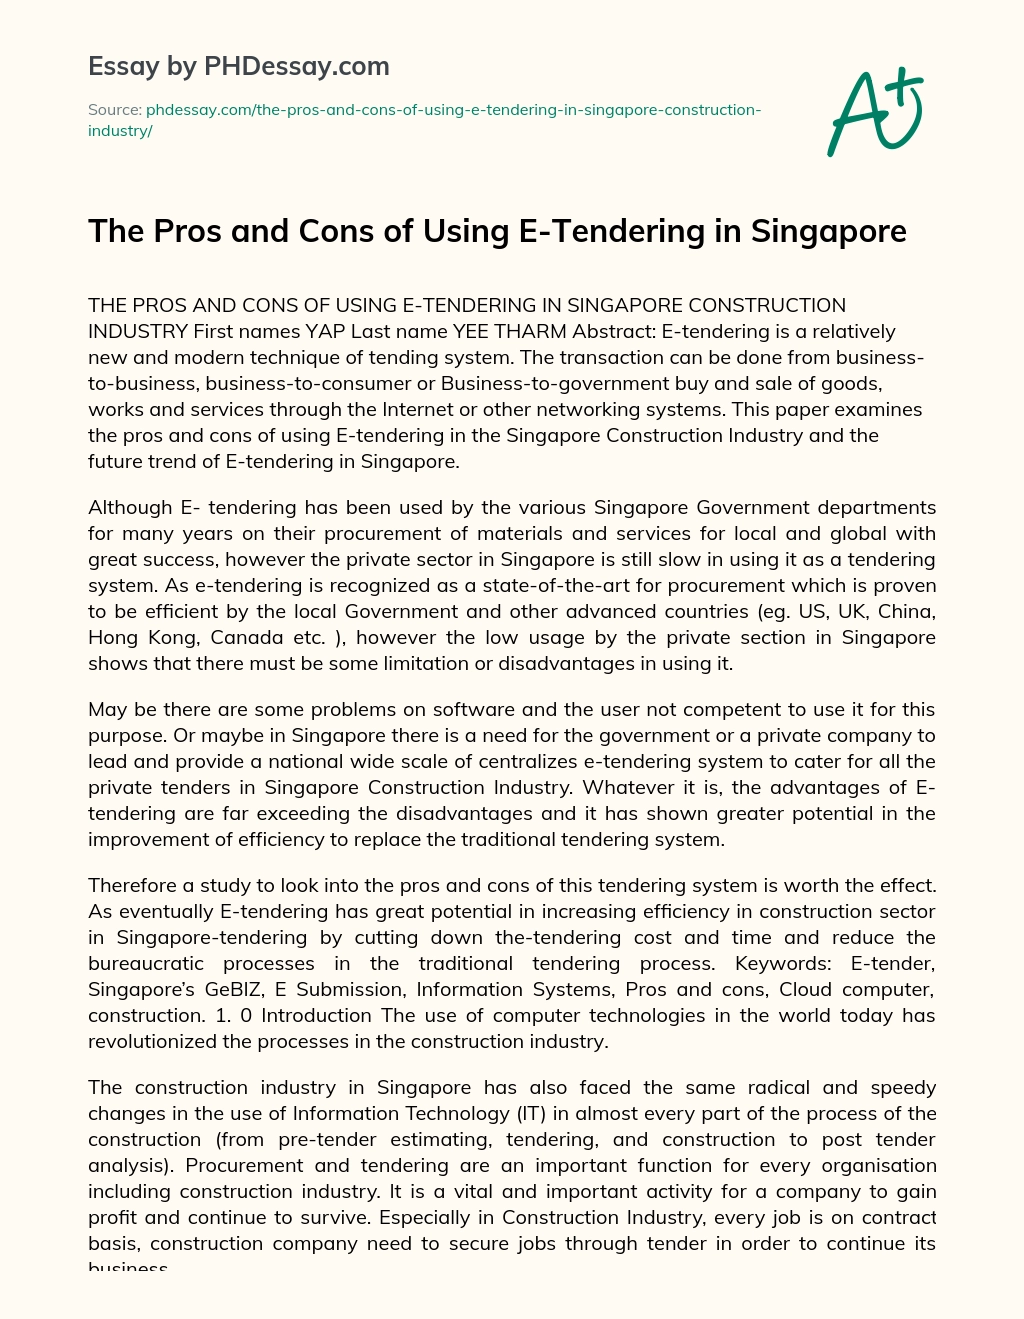 The Pros and Cons of Using E-Tendering in Singapore essay